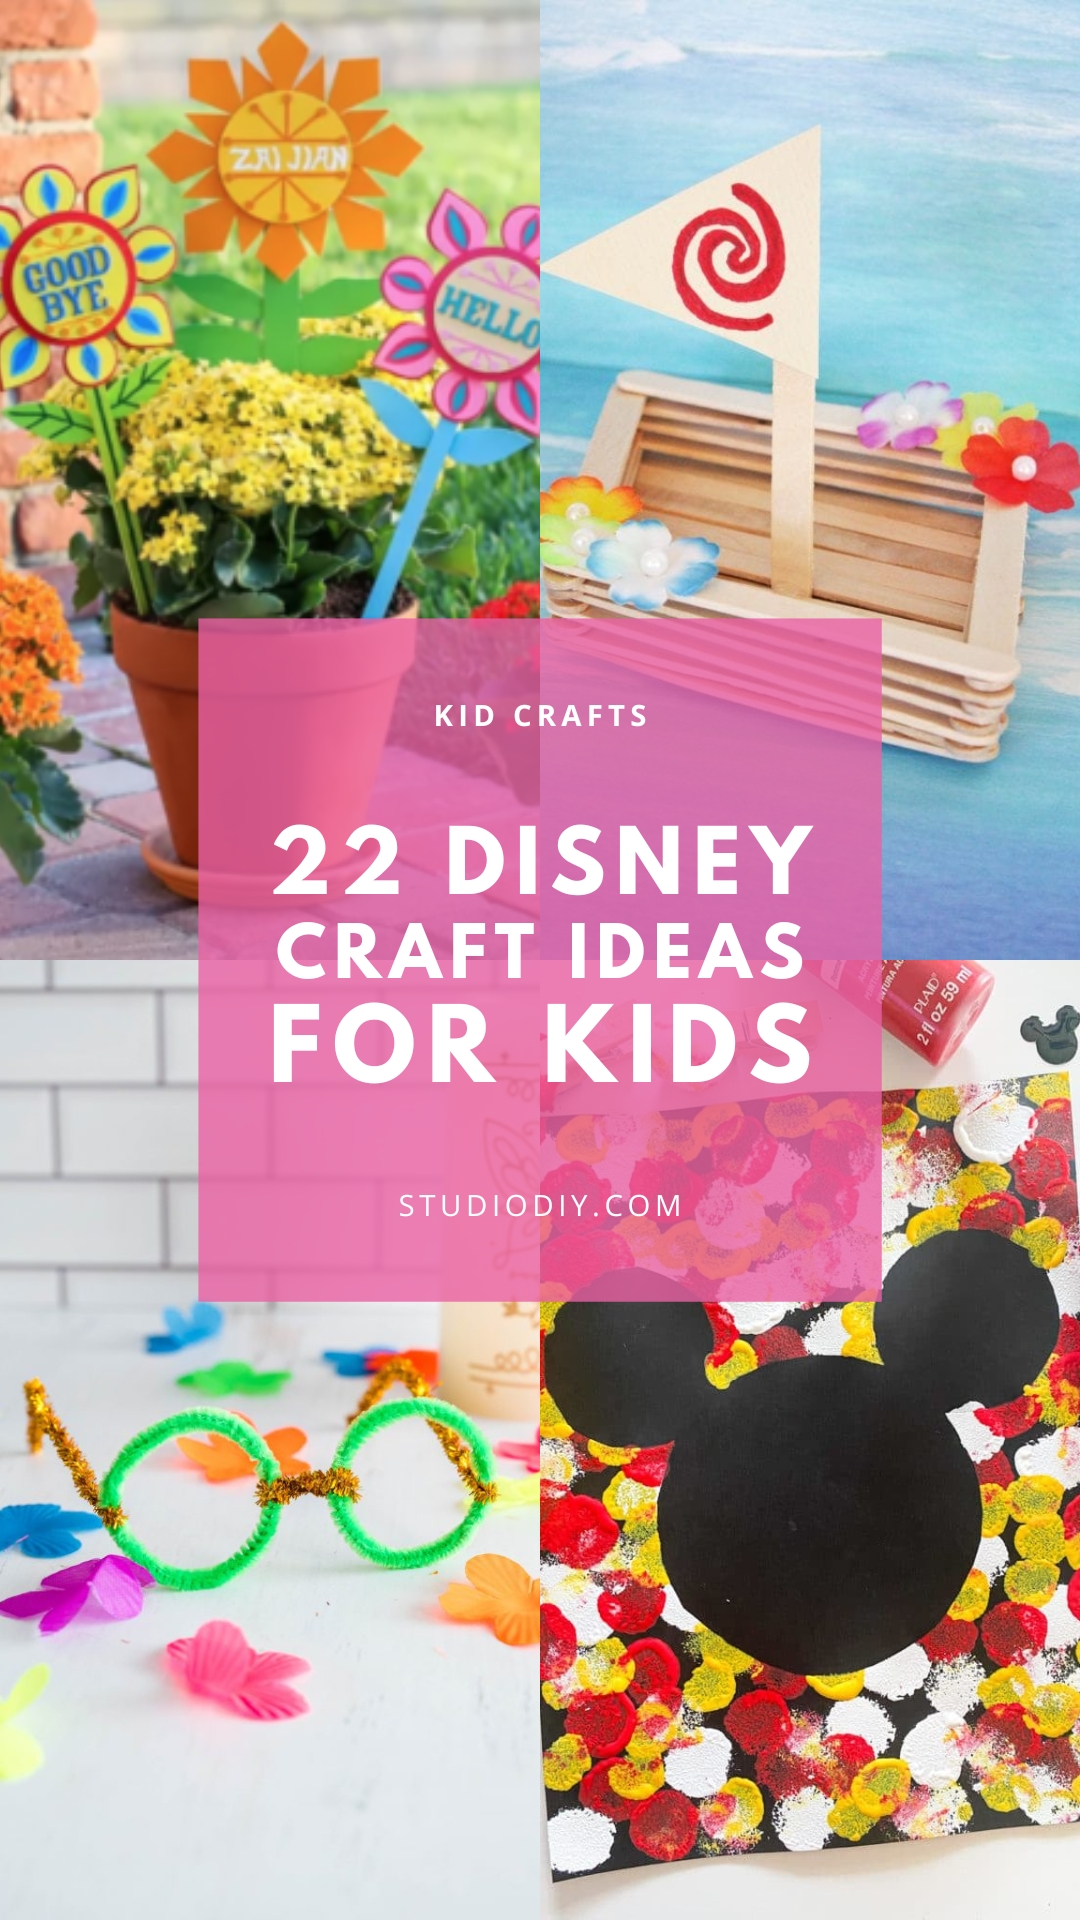 5 Easy & Colorful Disney Home Projects to Make